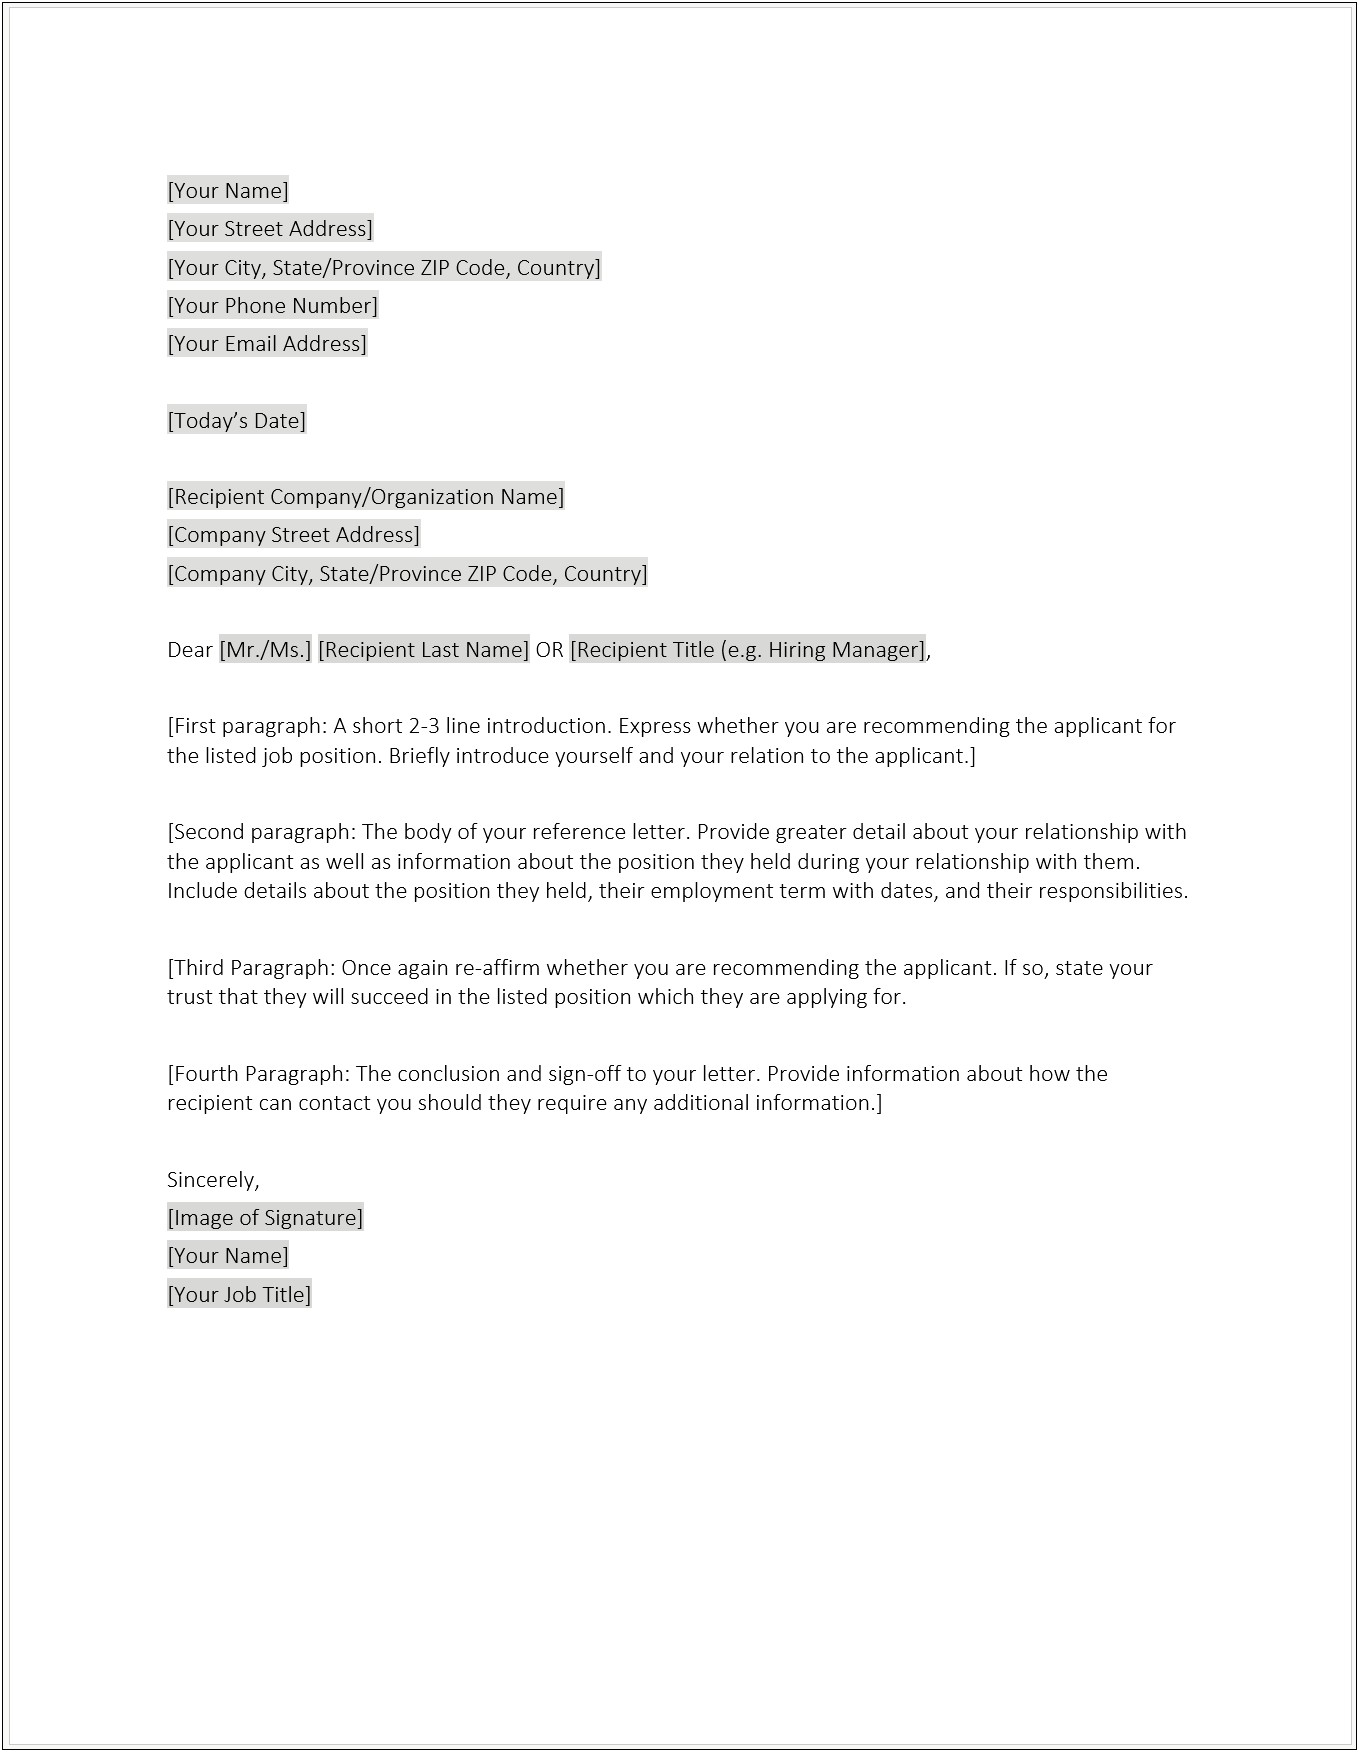 Microsoft Office Letter Template Download Center